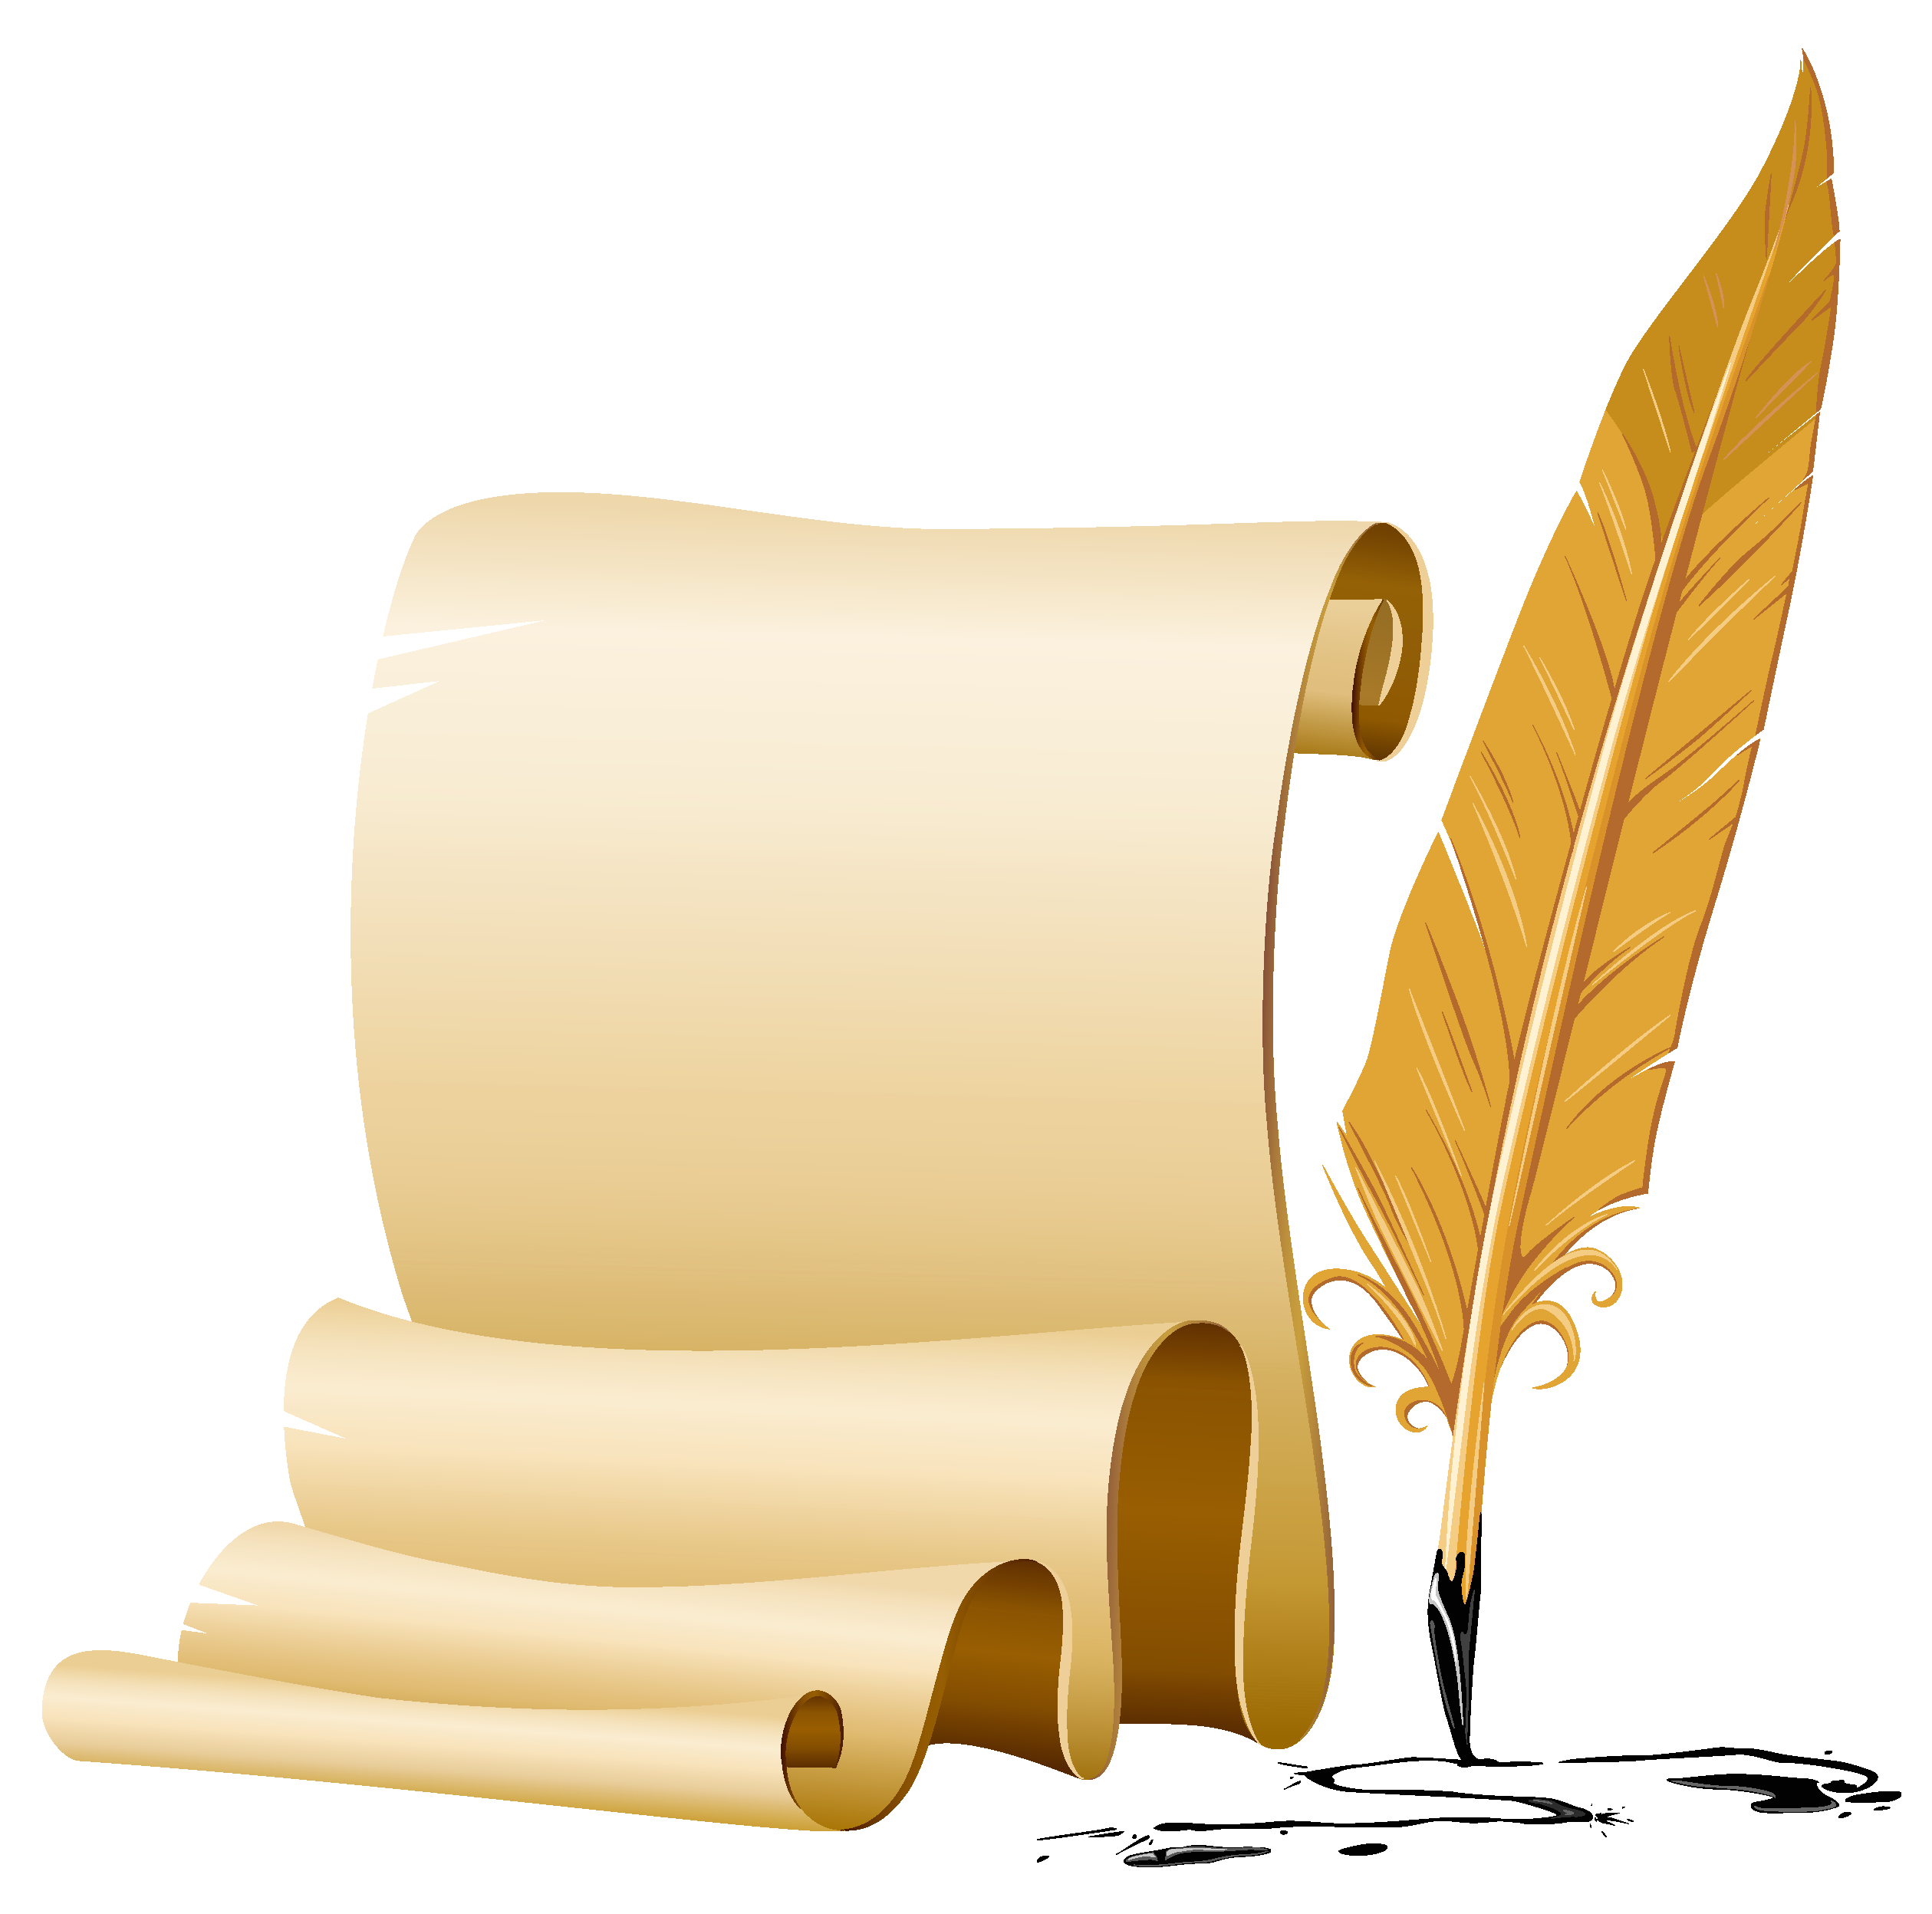 Scrolled and quill pen. Clipart writing scroll